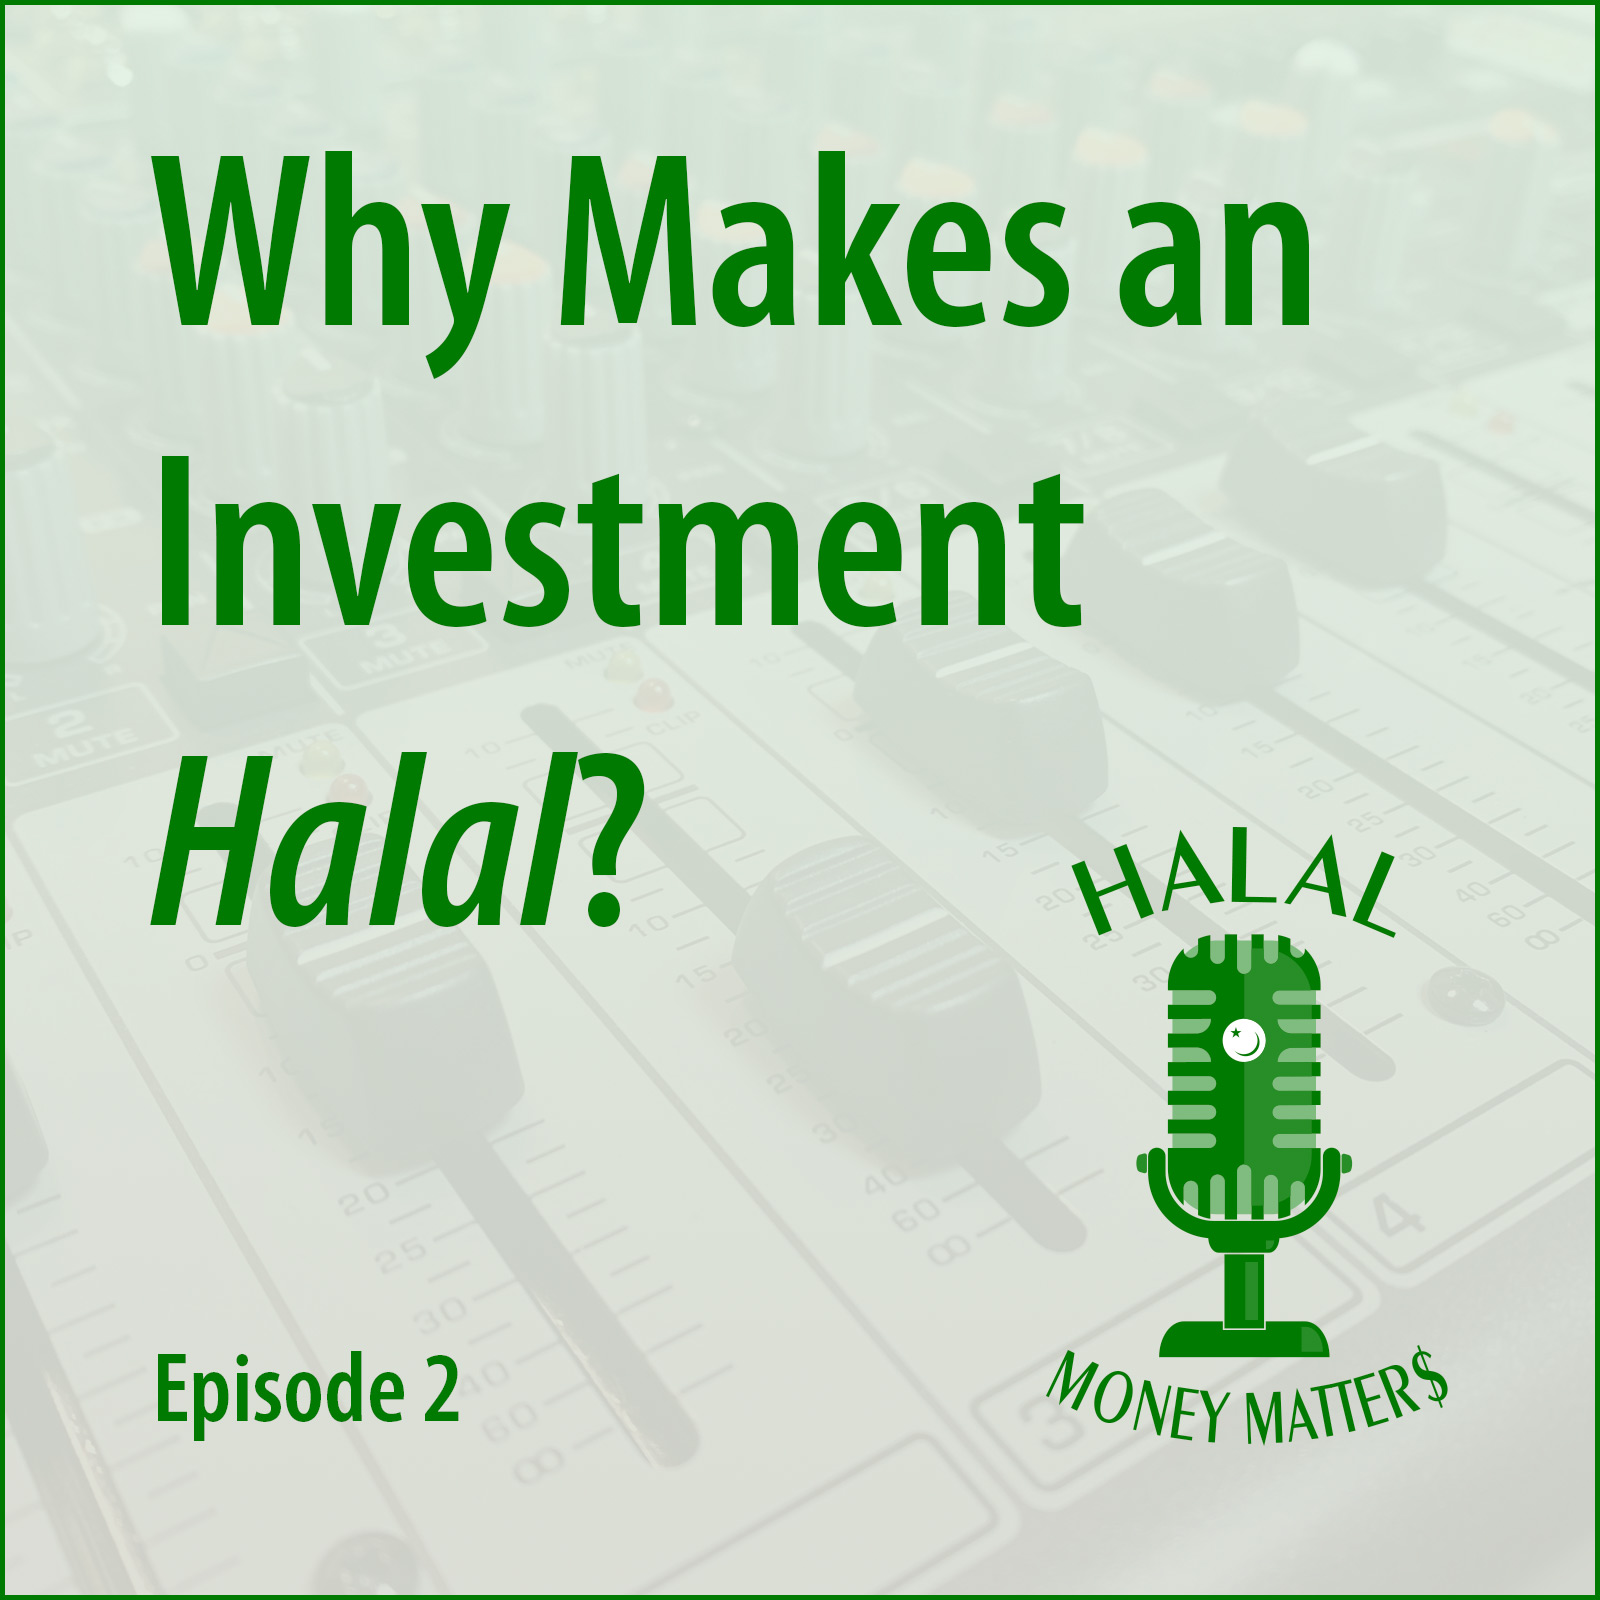 Episode 2 What Makes an Investment Halal? Halal Money